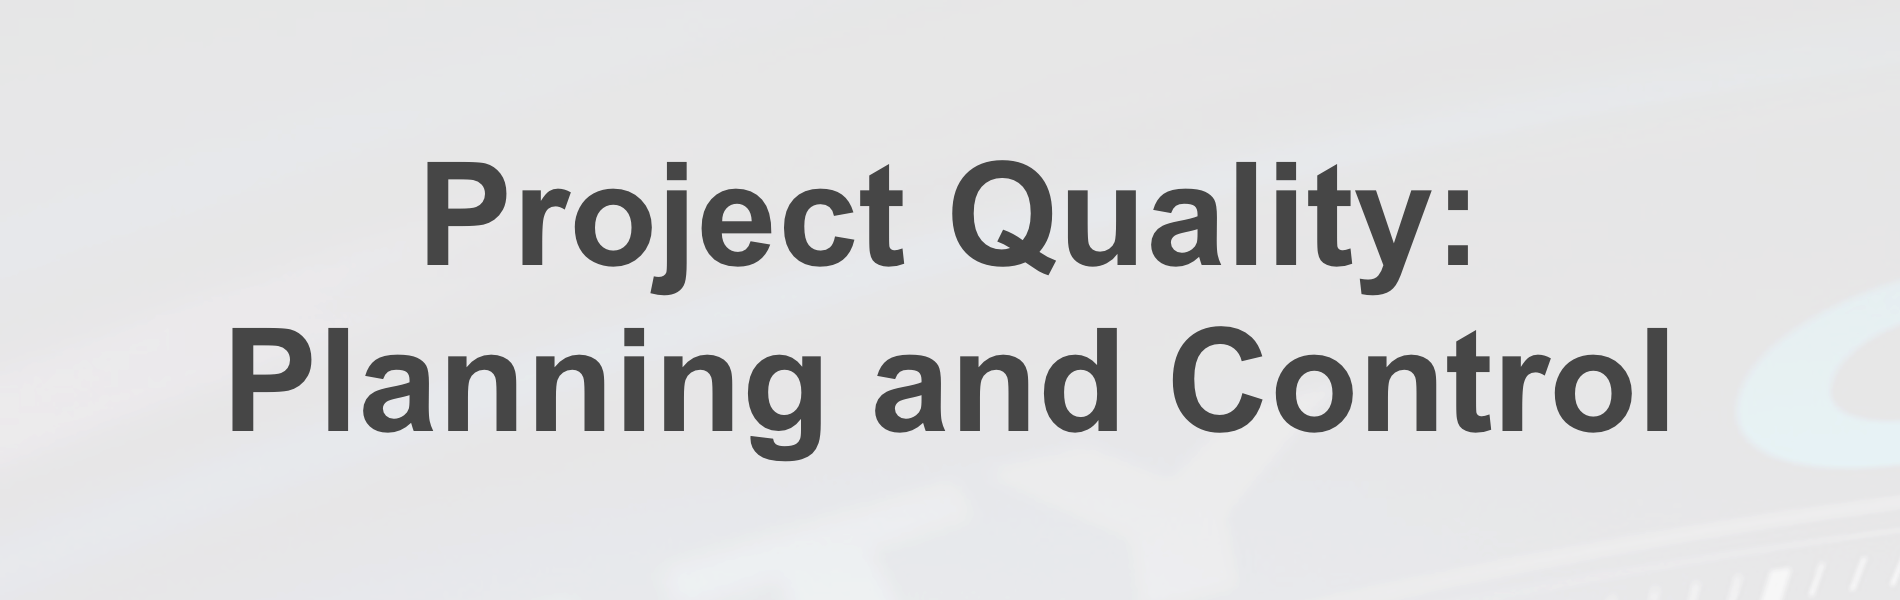 Project Quality: Planning and Control